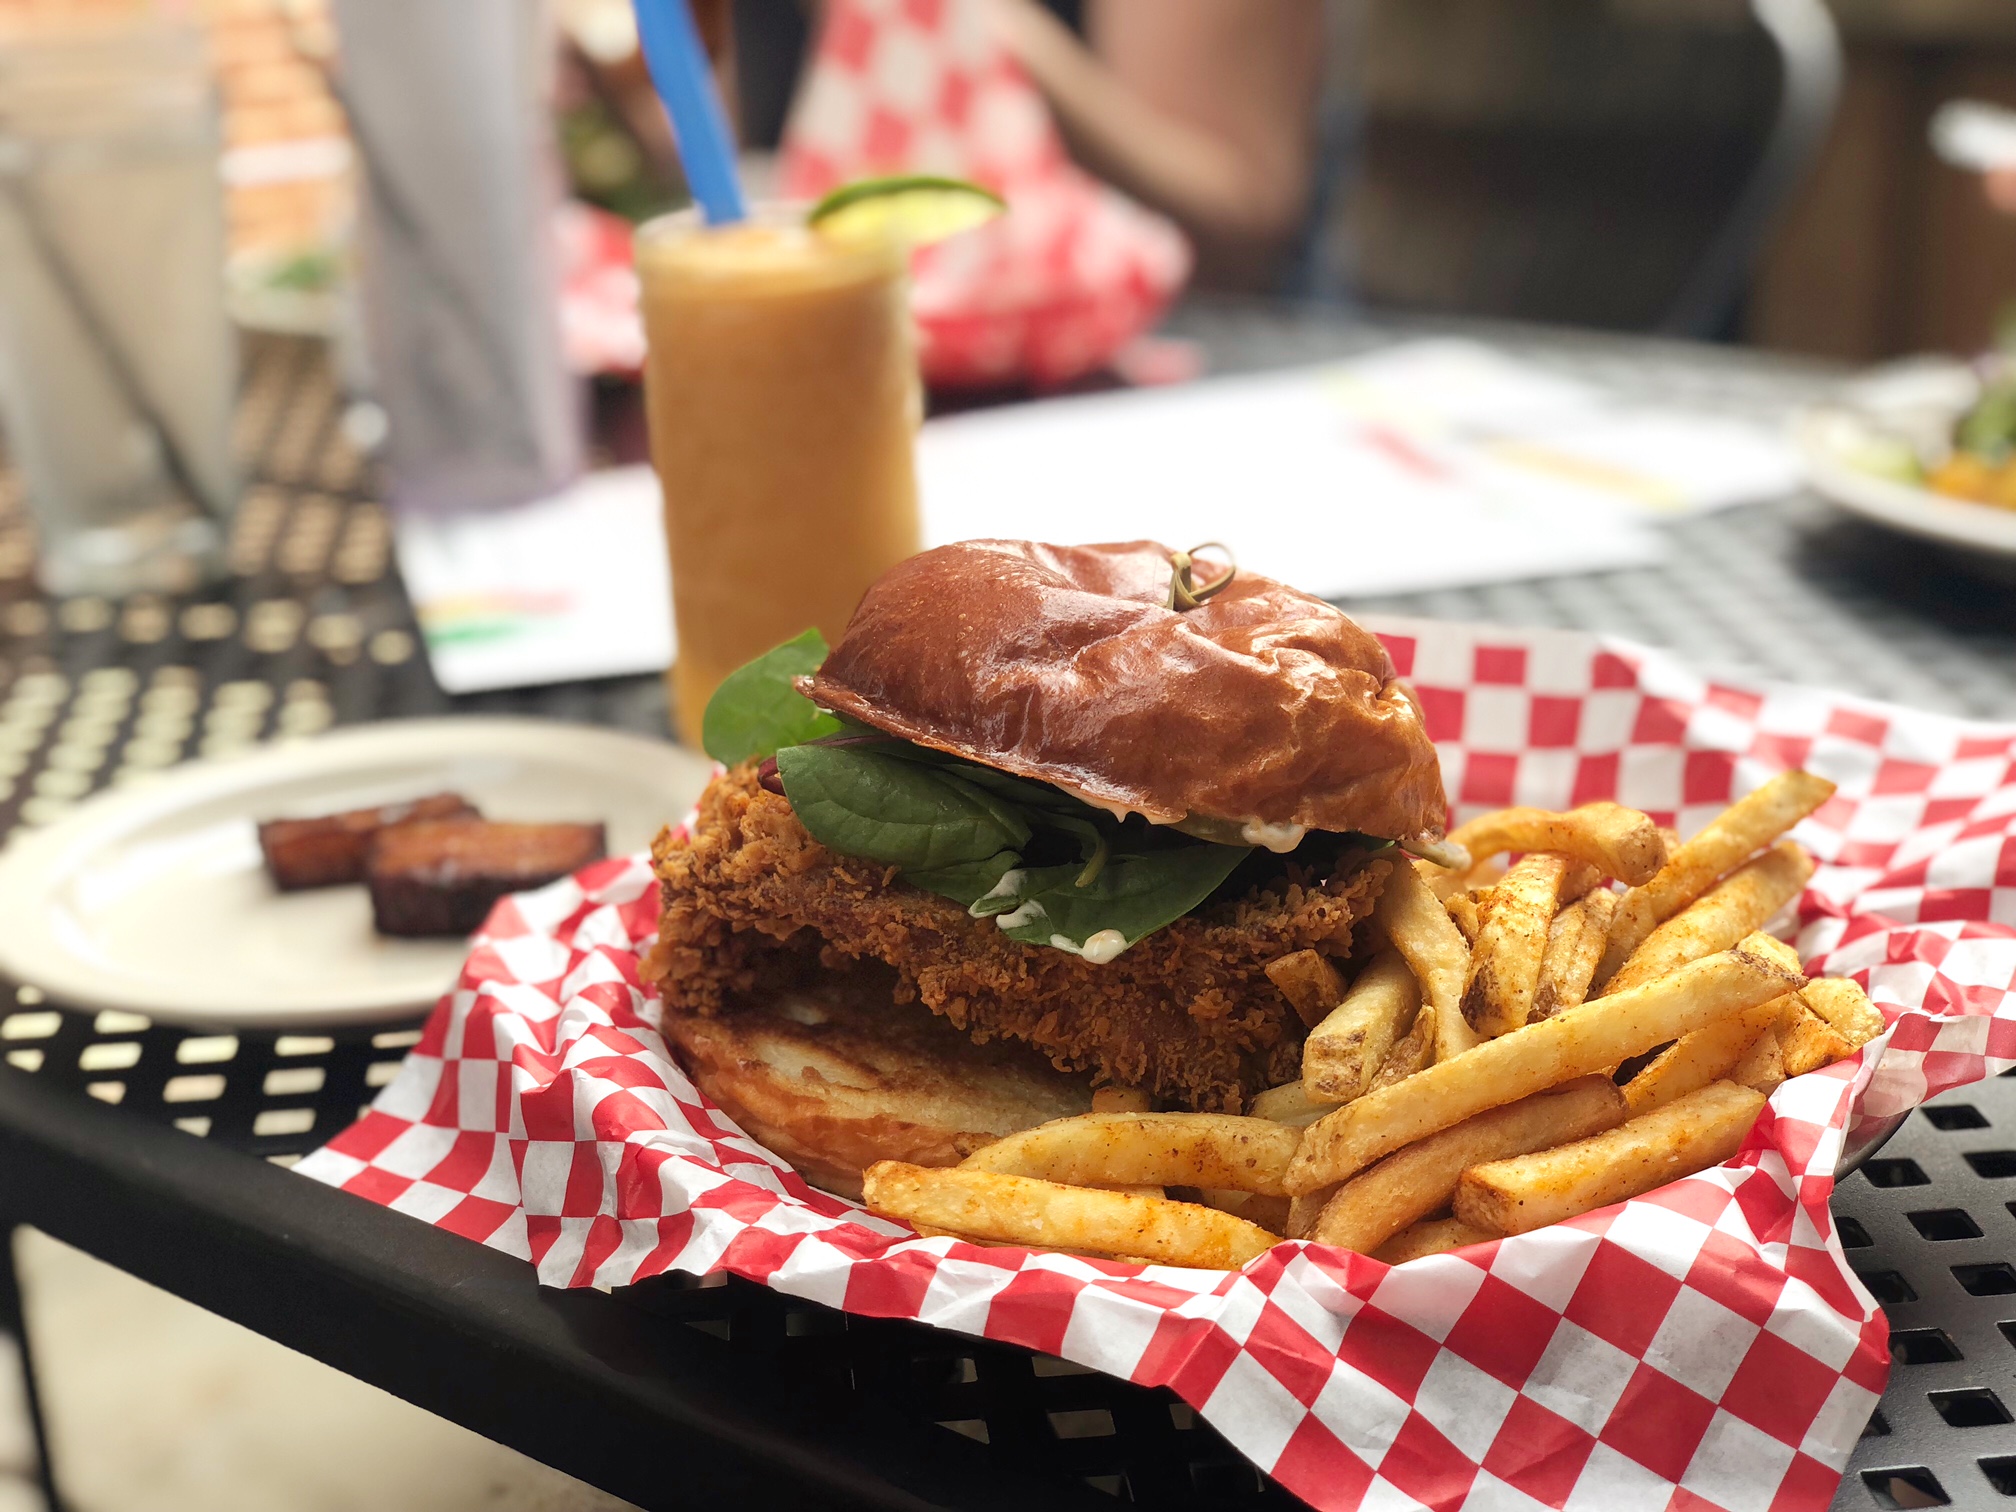 On an outdoor patio table, there is a plate with a chicken sandwich and skinny fries on a red-and-white checkered parchment paper. Beside the sandwich plate, there is a small white plate with two slices of pork belly. In the background, there is an orange slushie drink. Photo by Alyssa Buckley.